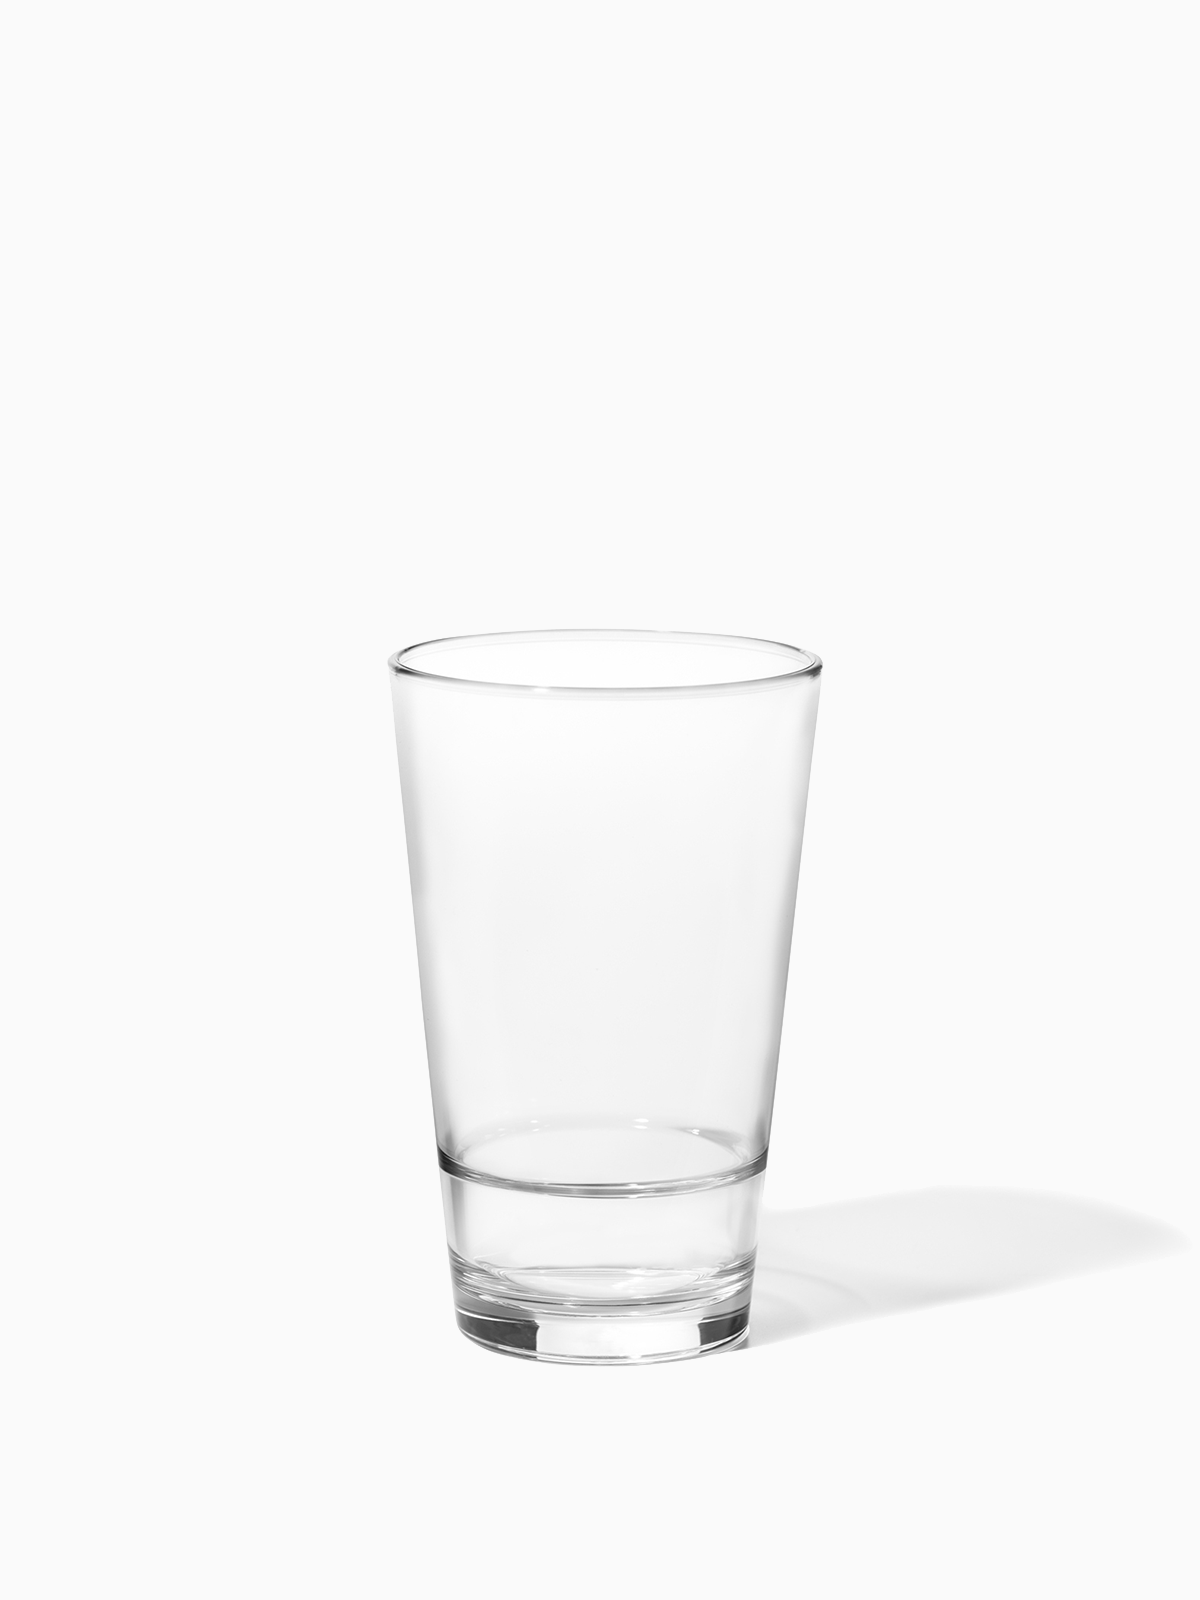 Plastic Drinking Glasses Tumblers Clear - 16 oz - Perfect for Gifts -  Lightweight - Stackable - Set of 8 